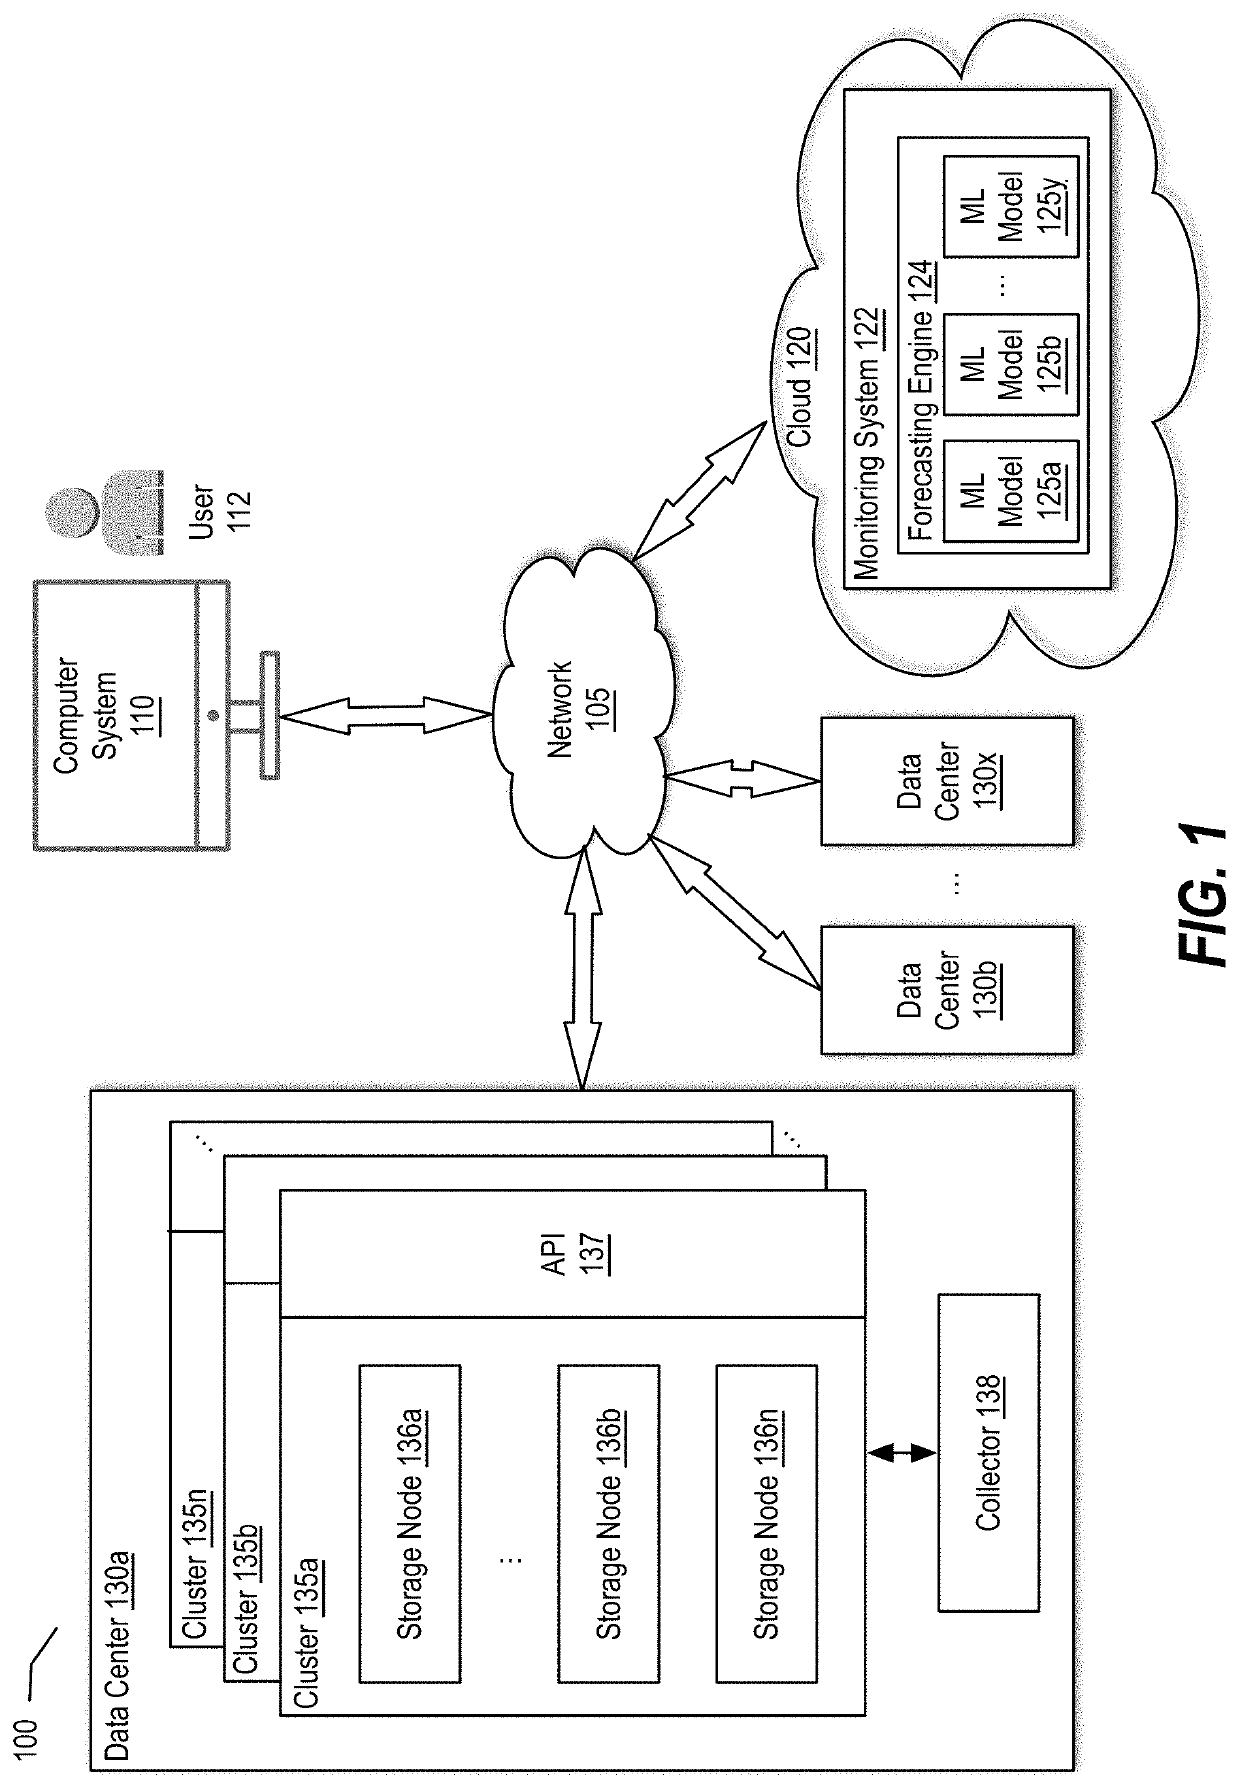 Multi-model block capacity forecasting for a distributed storage system